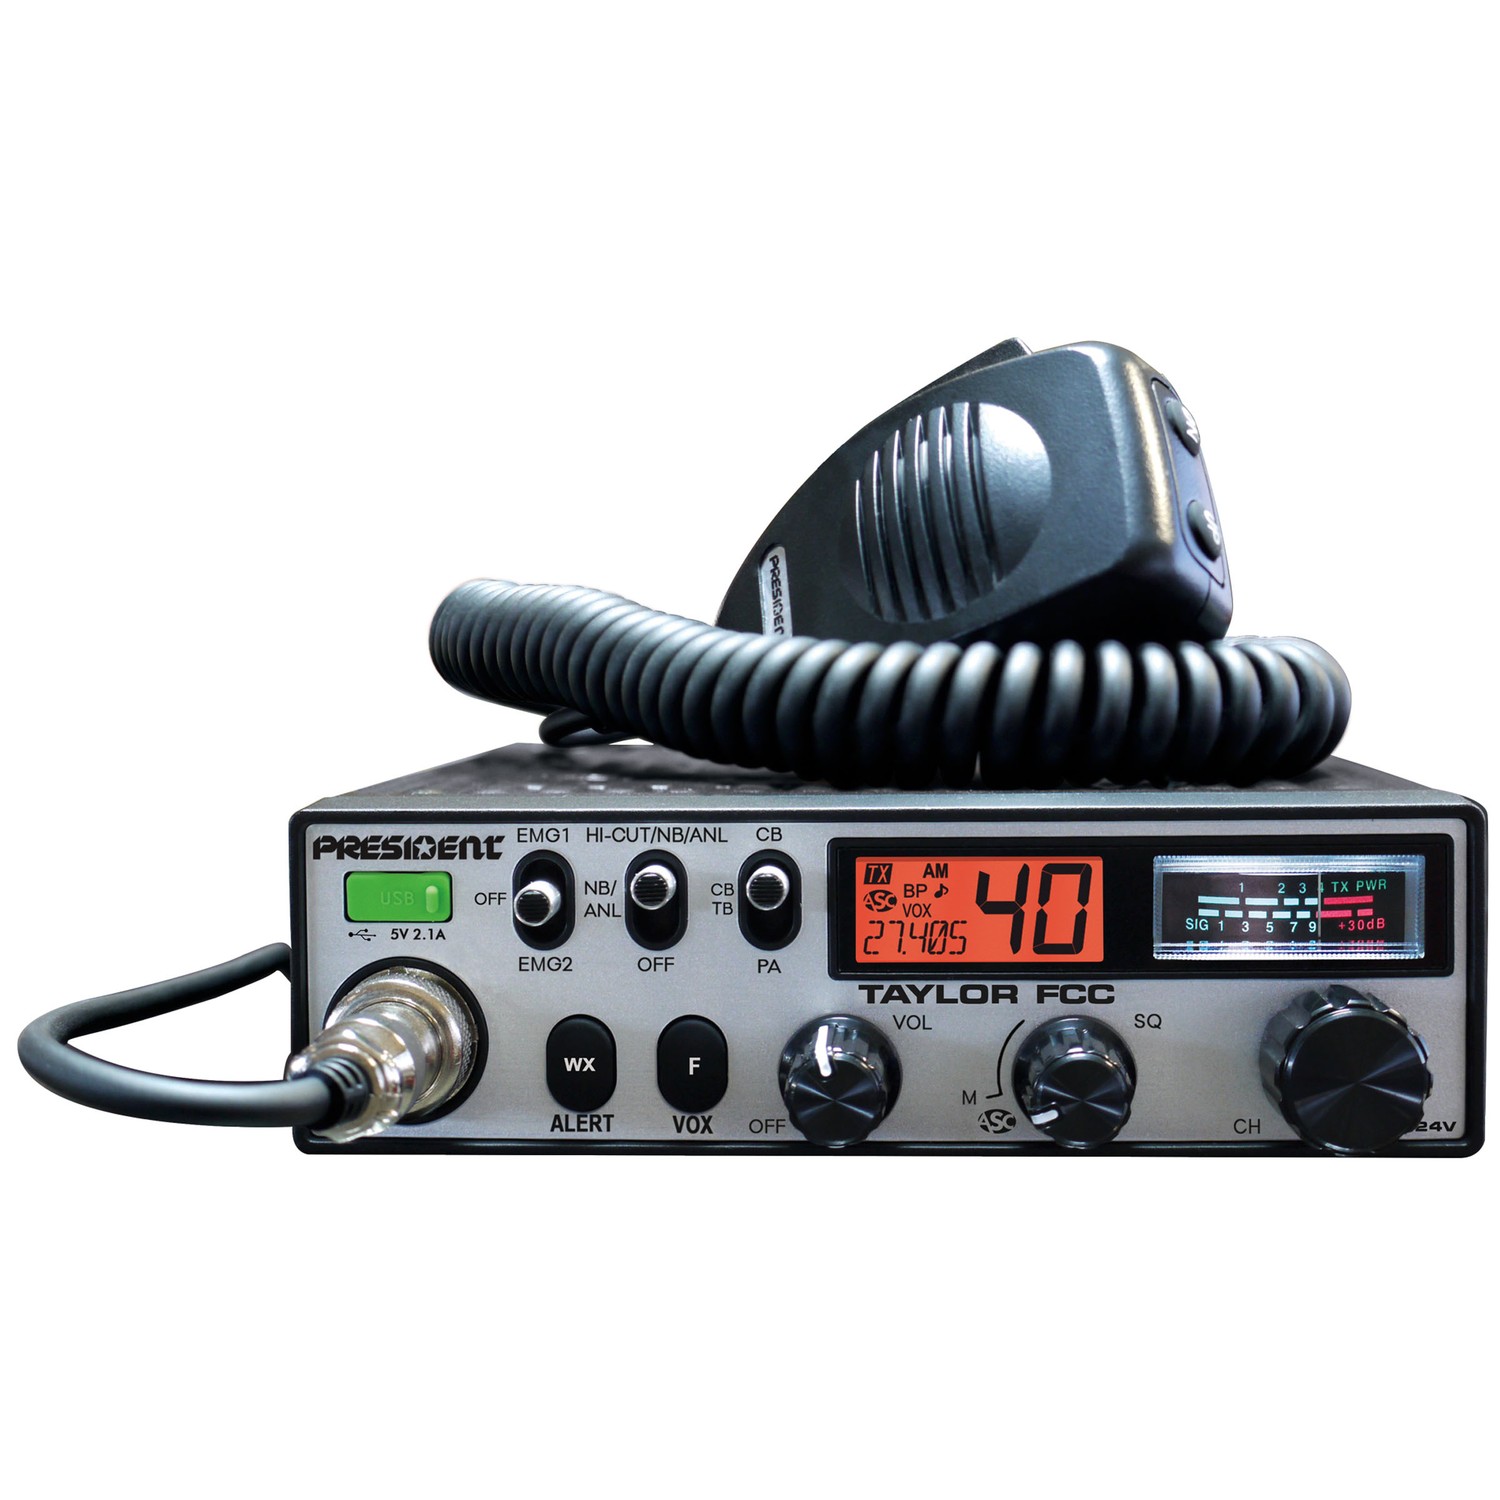 President - TAYLOR 12-24 Volt Deluxe Cb Radio With 7 Back-Lite Colors, 7 Wx Channels With Alert & Vox